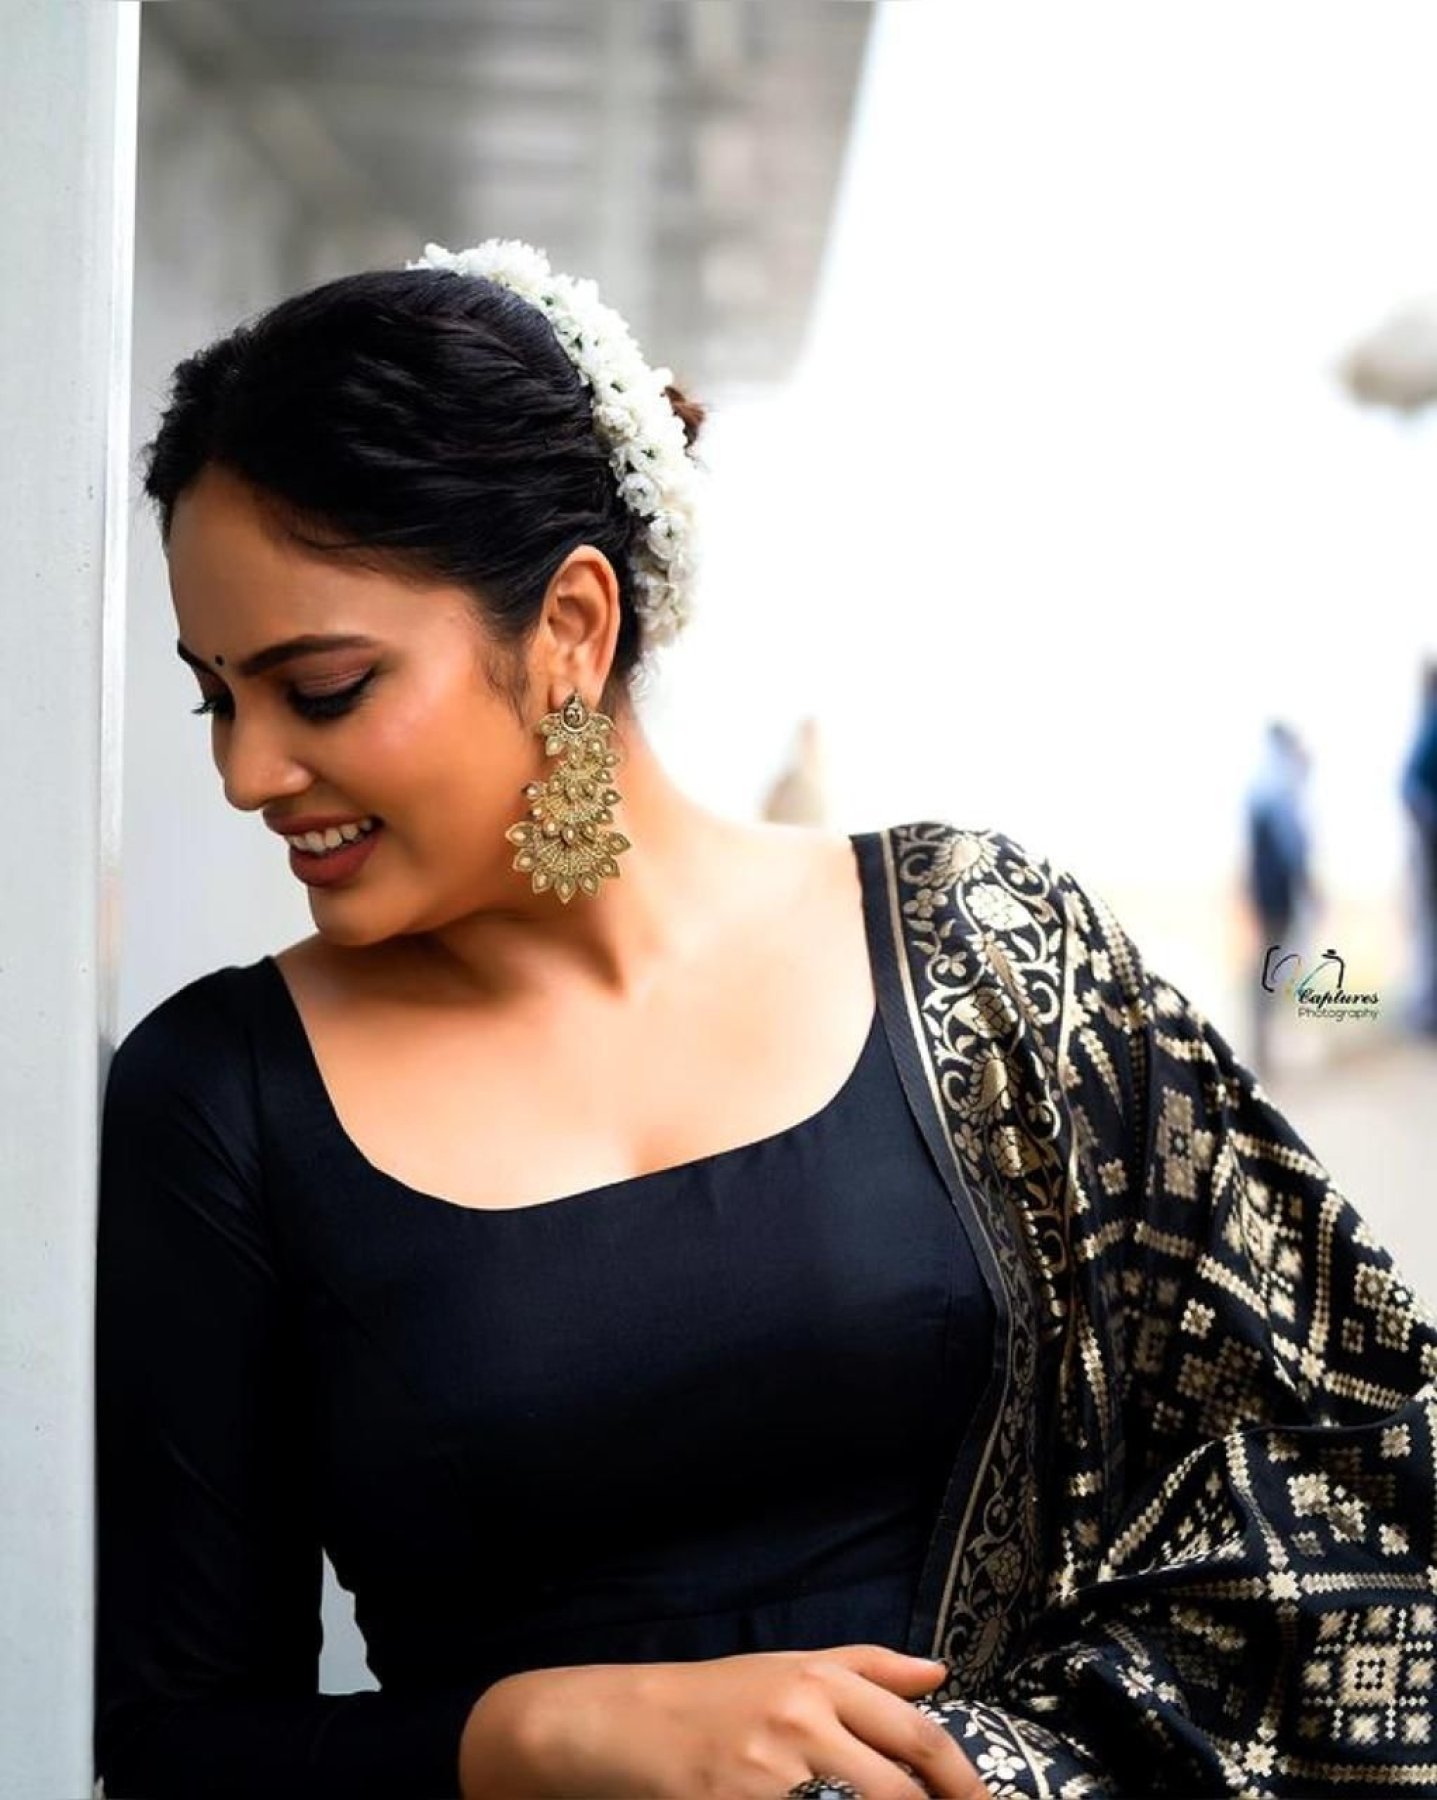 How to Style Black Sarees for Parties? Inspired from Sapthami Gowda